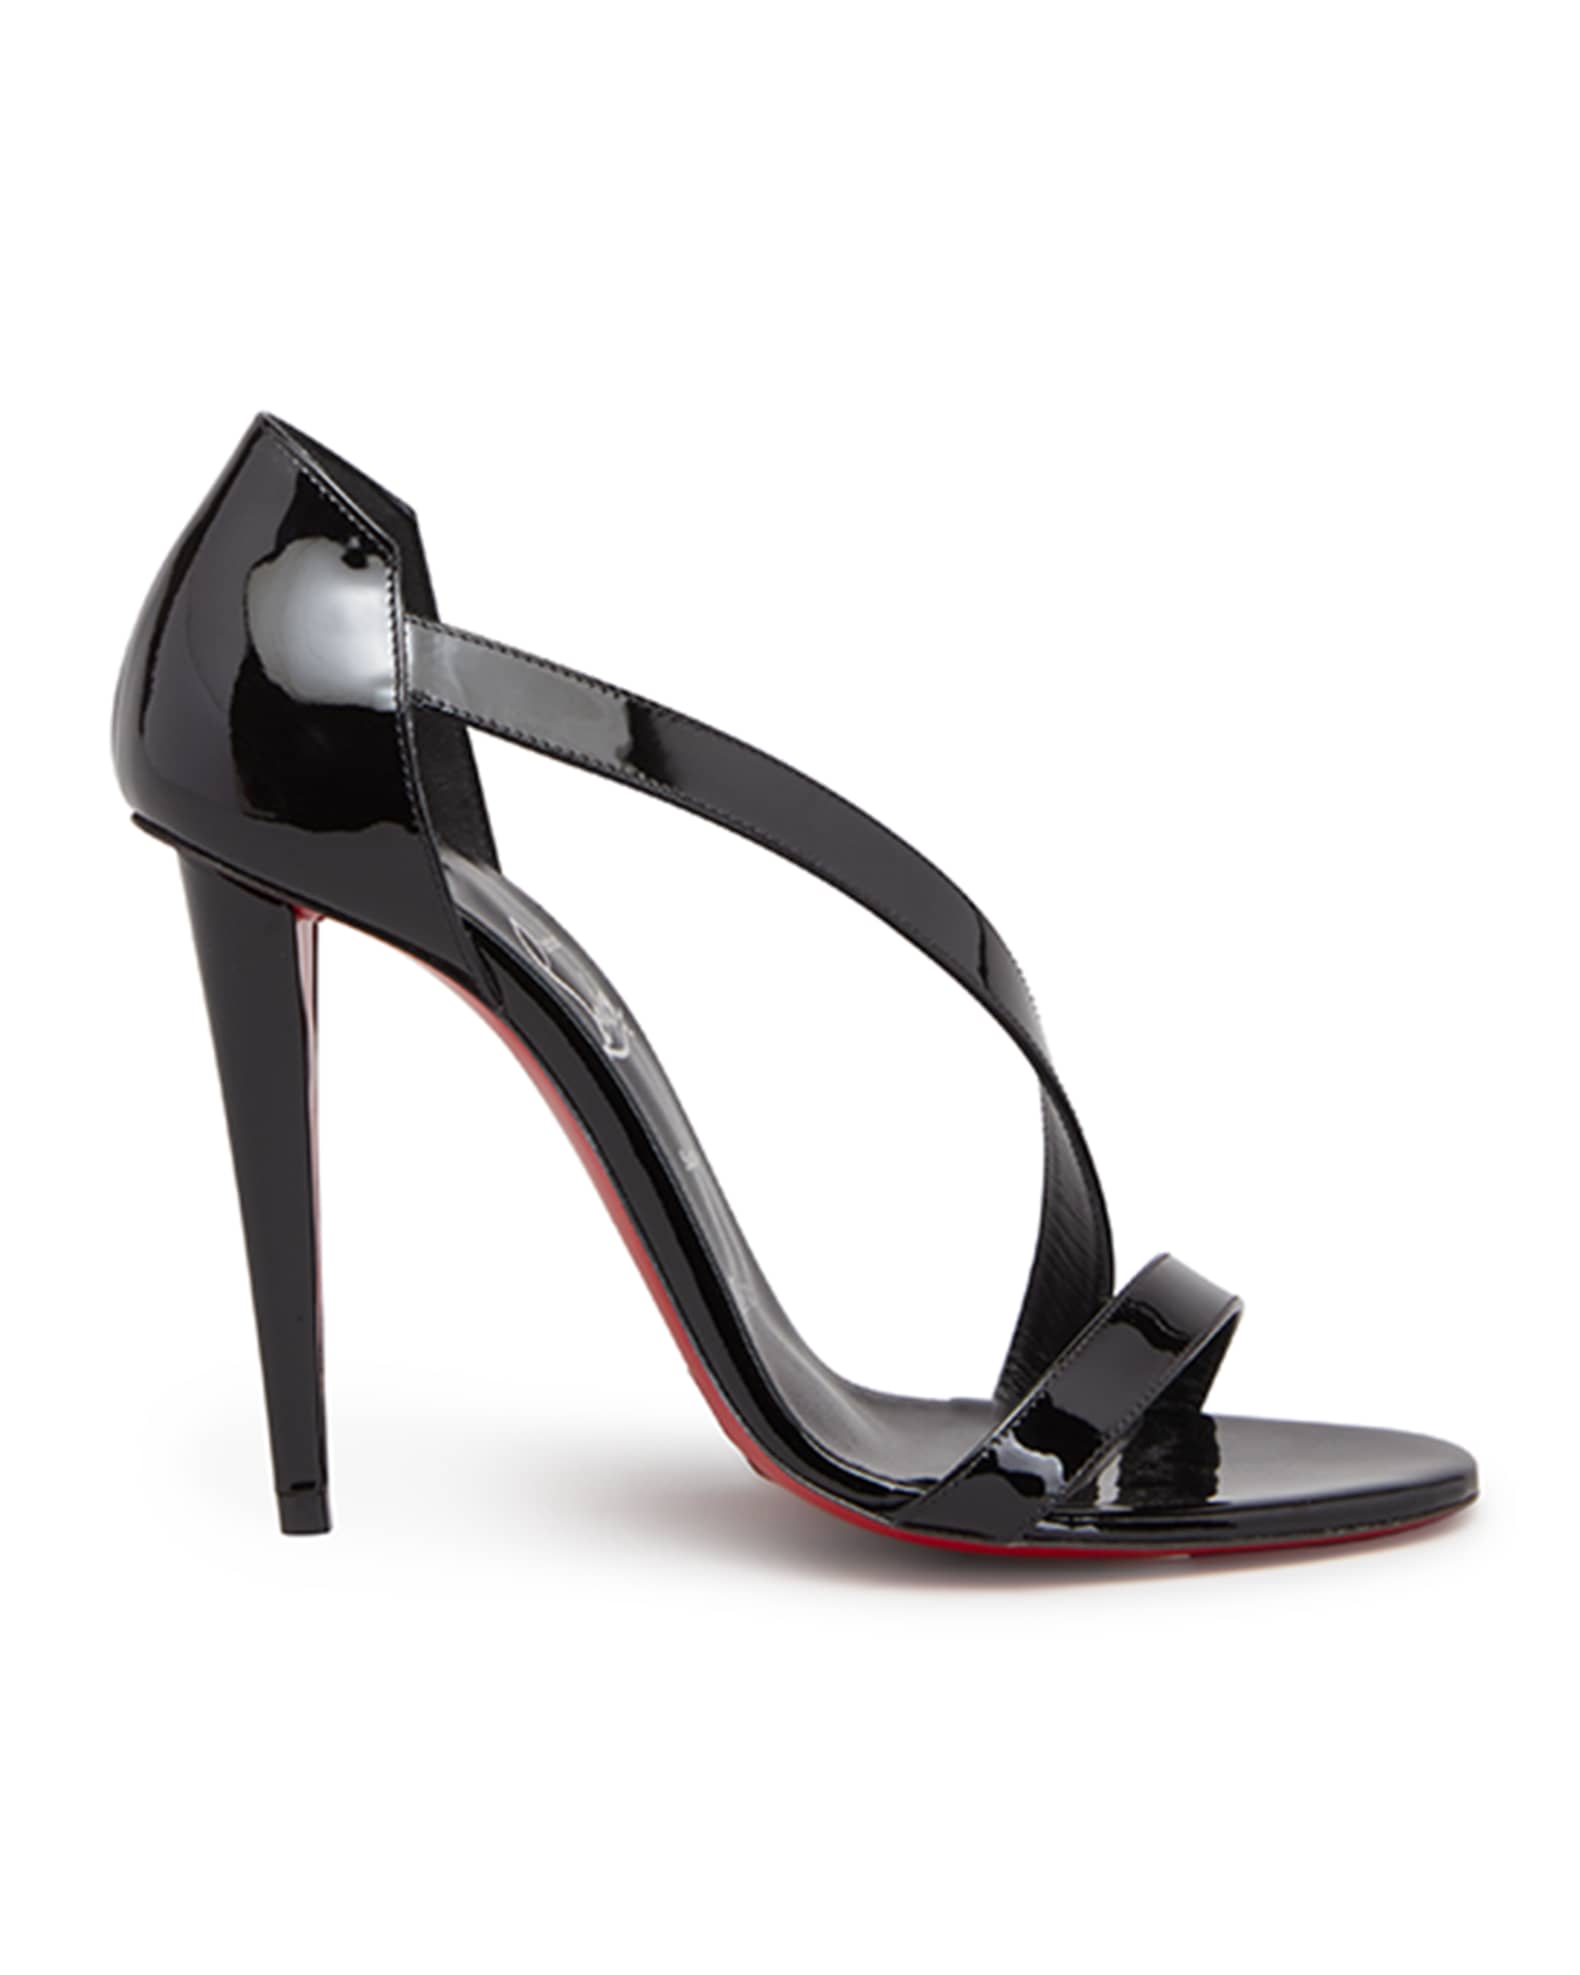 Christian Louboutin Astridal Patent Strappy Red Sole Sandals | Neiman ...